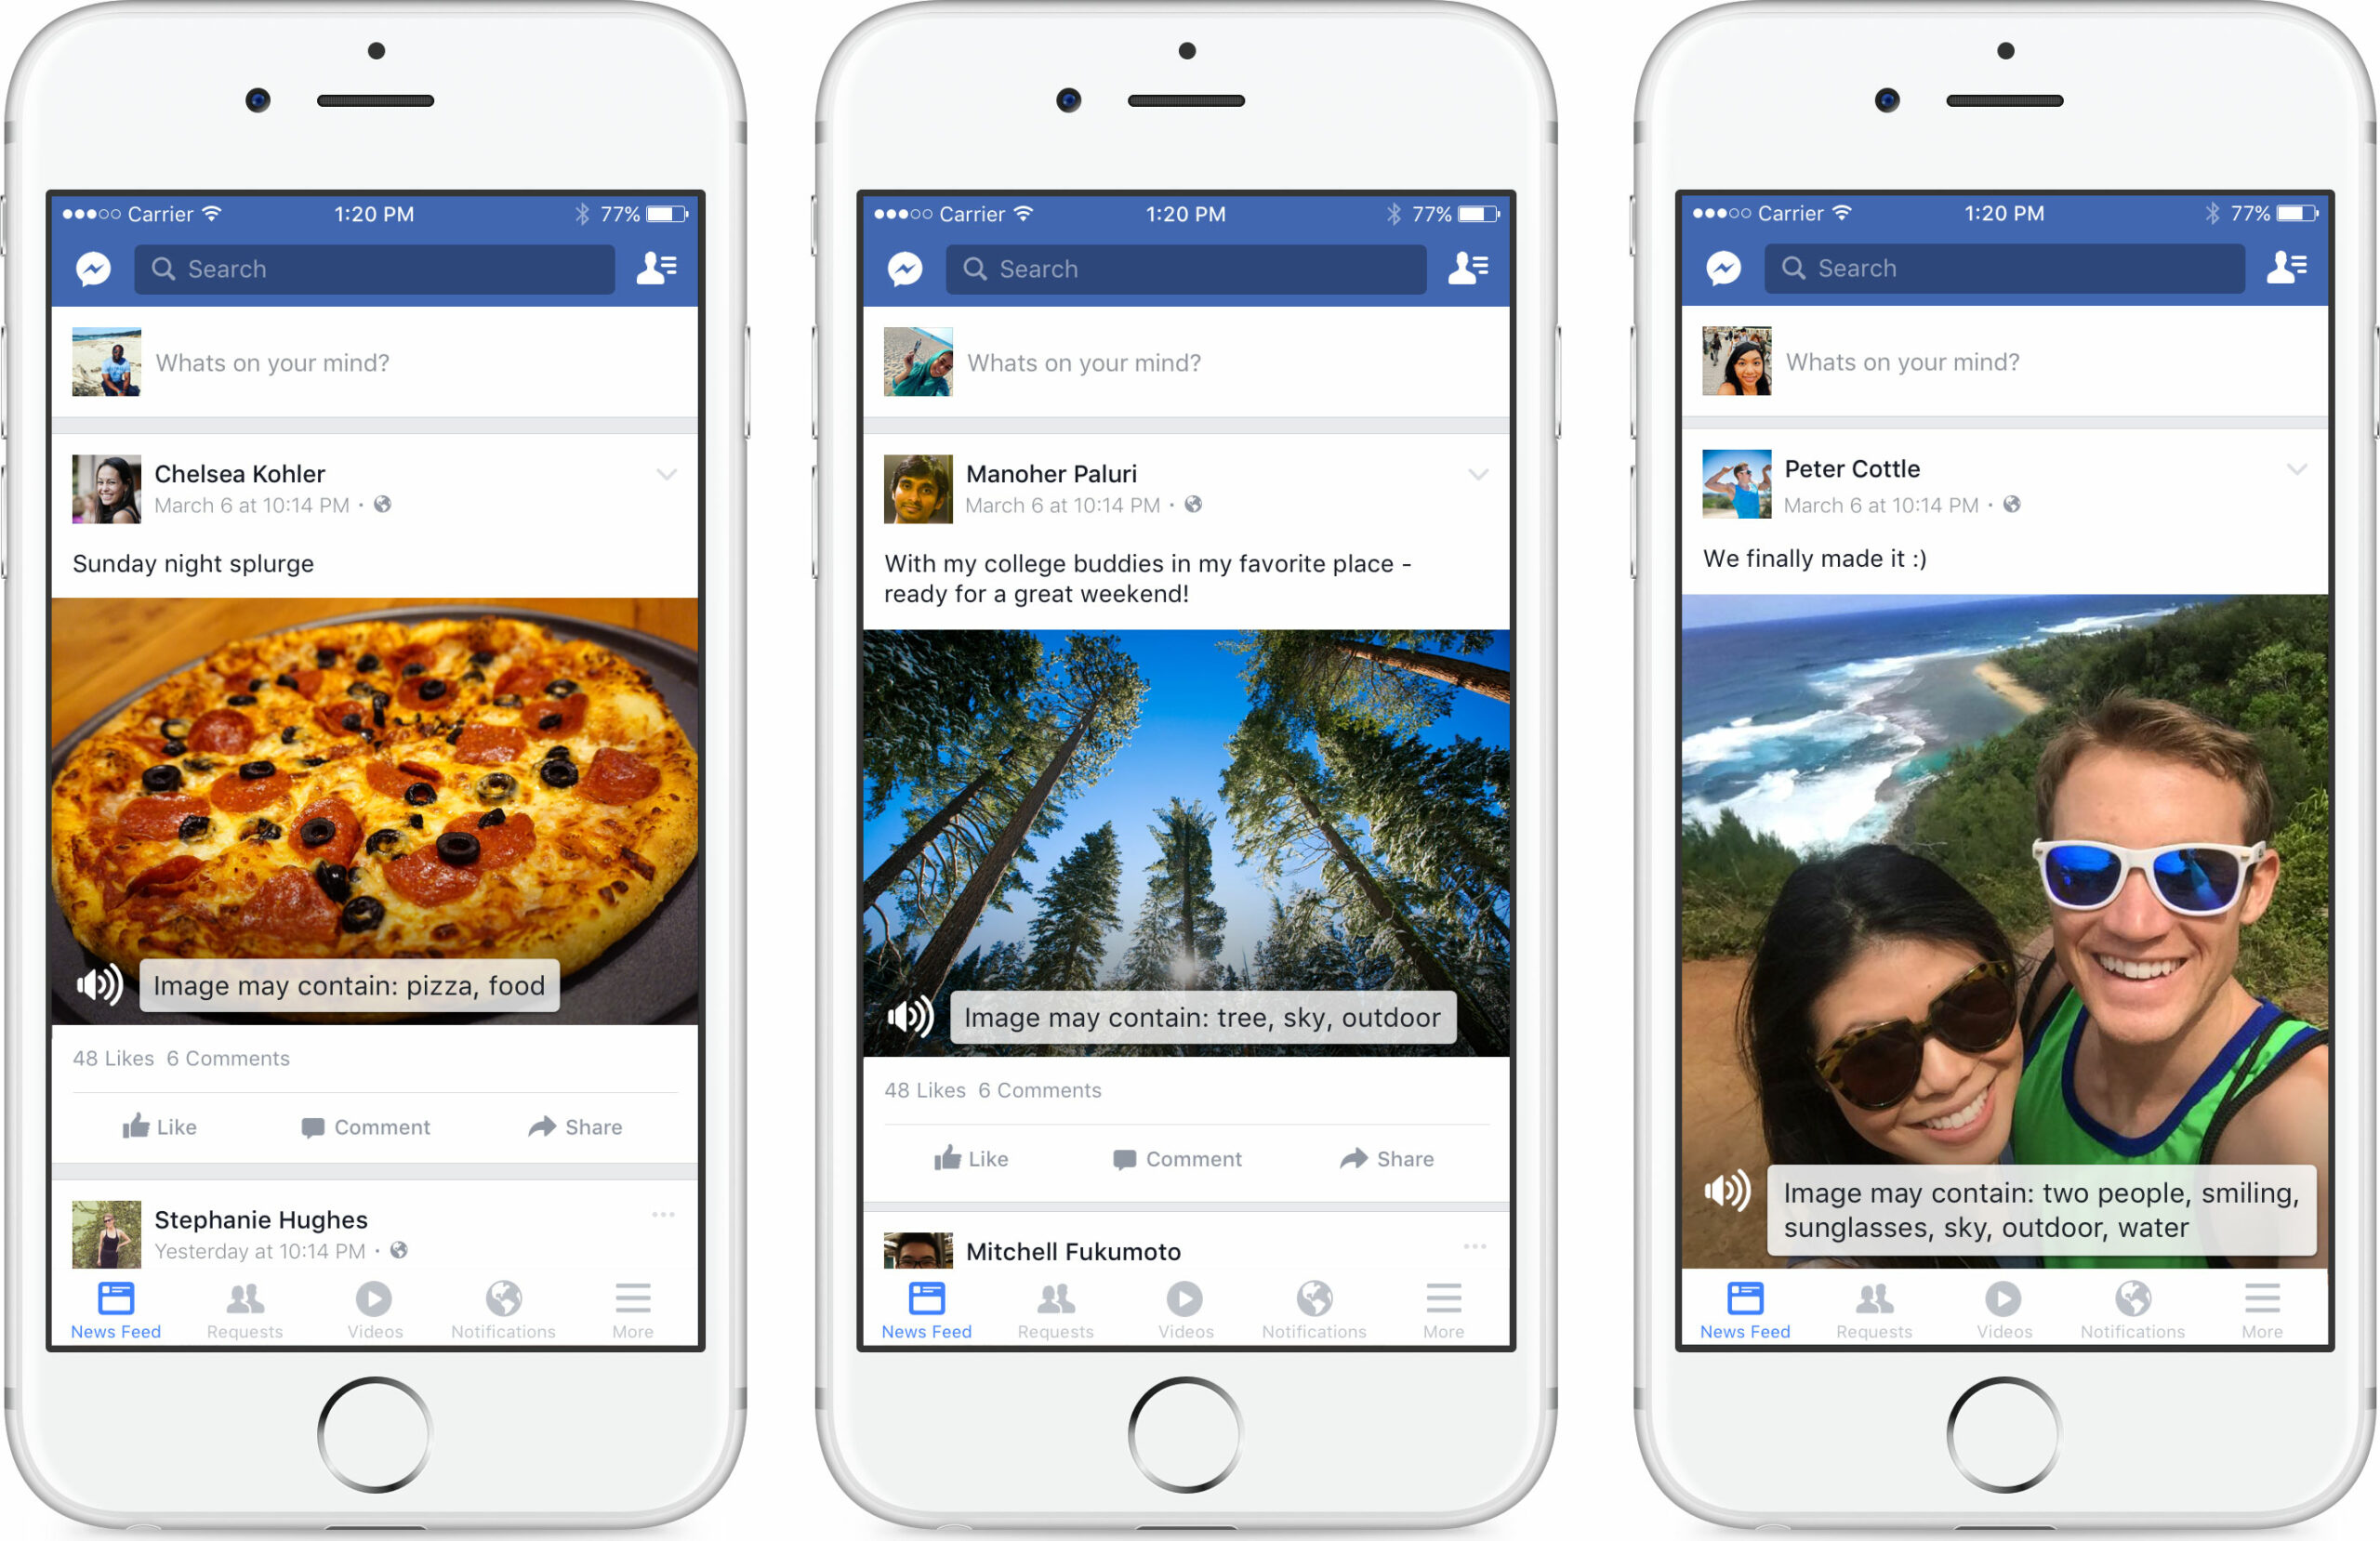 How Artificial Intelligence Will Translate Facebook Photos For The Blind